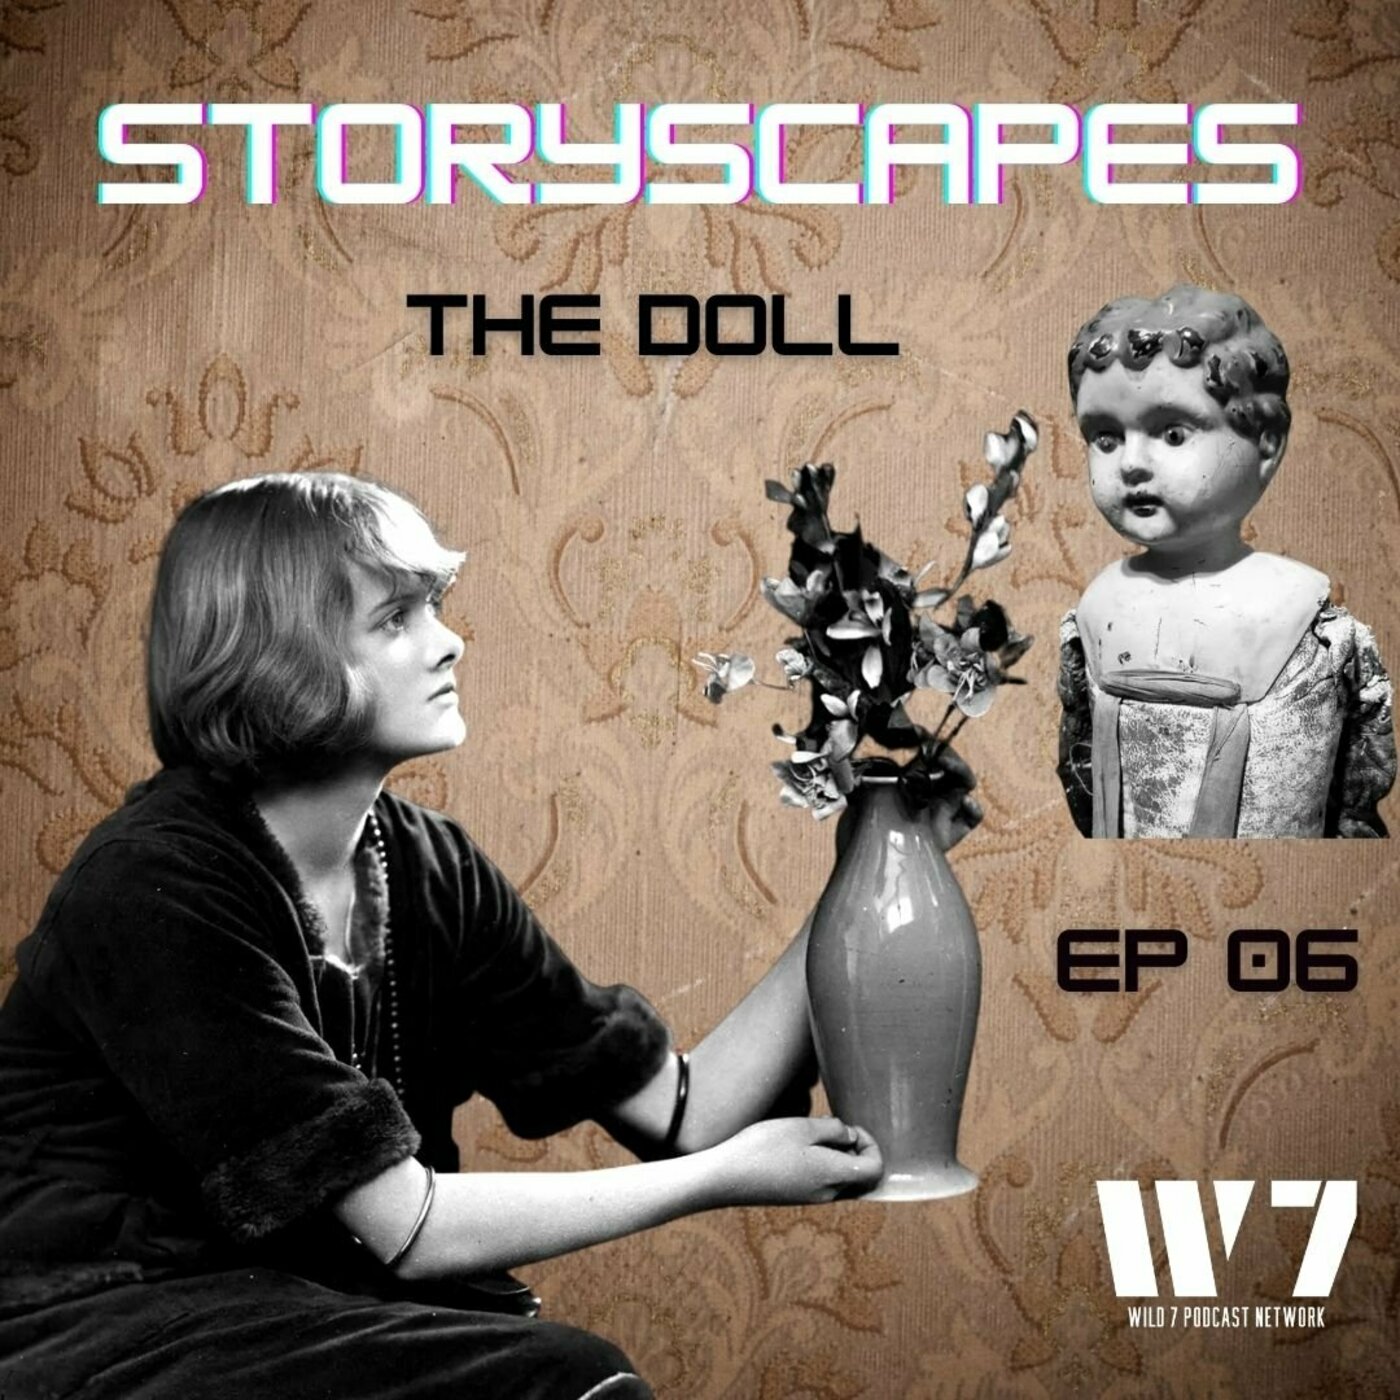 Episode 06 - The Doll - by  Daphne du Maurier - STORYSCAPES